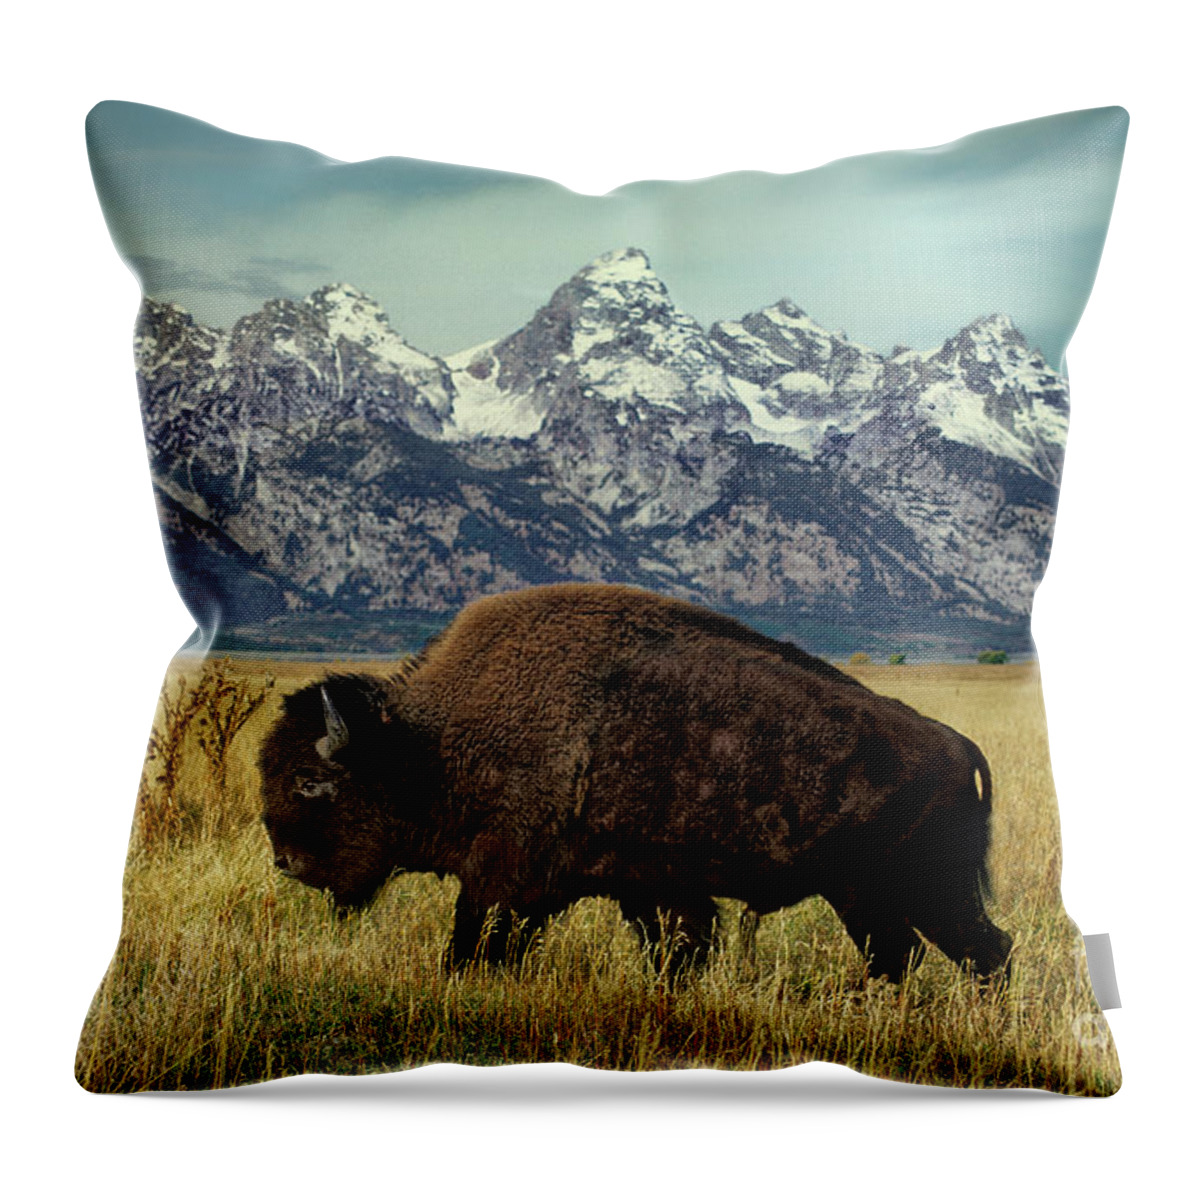 Dave Welling Throw Pillow featuring the photograph Adult Bison Bison Bison Wild Wyoming by Dave Welling